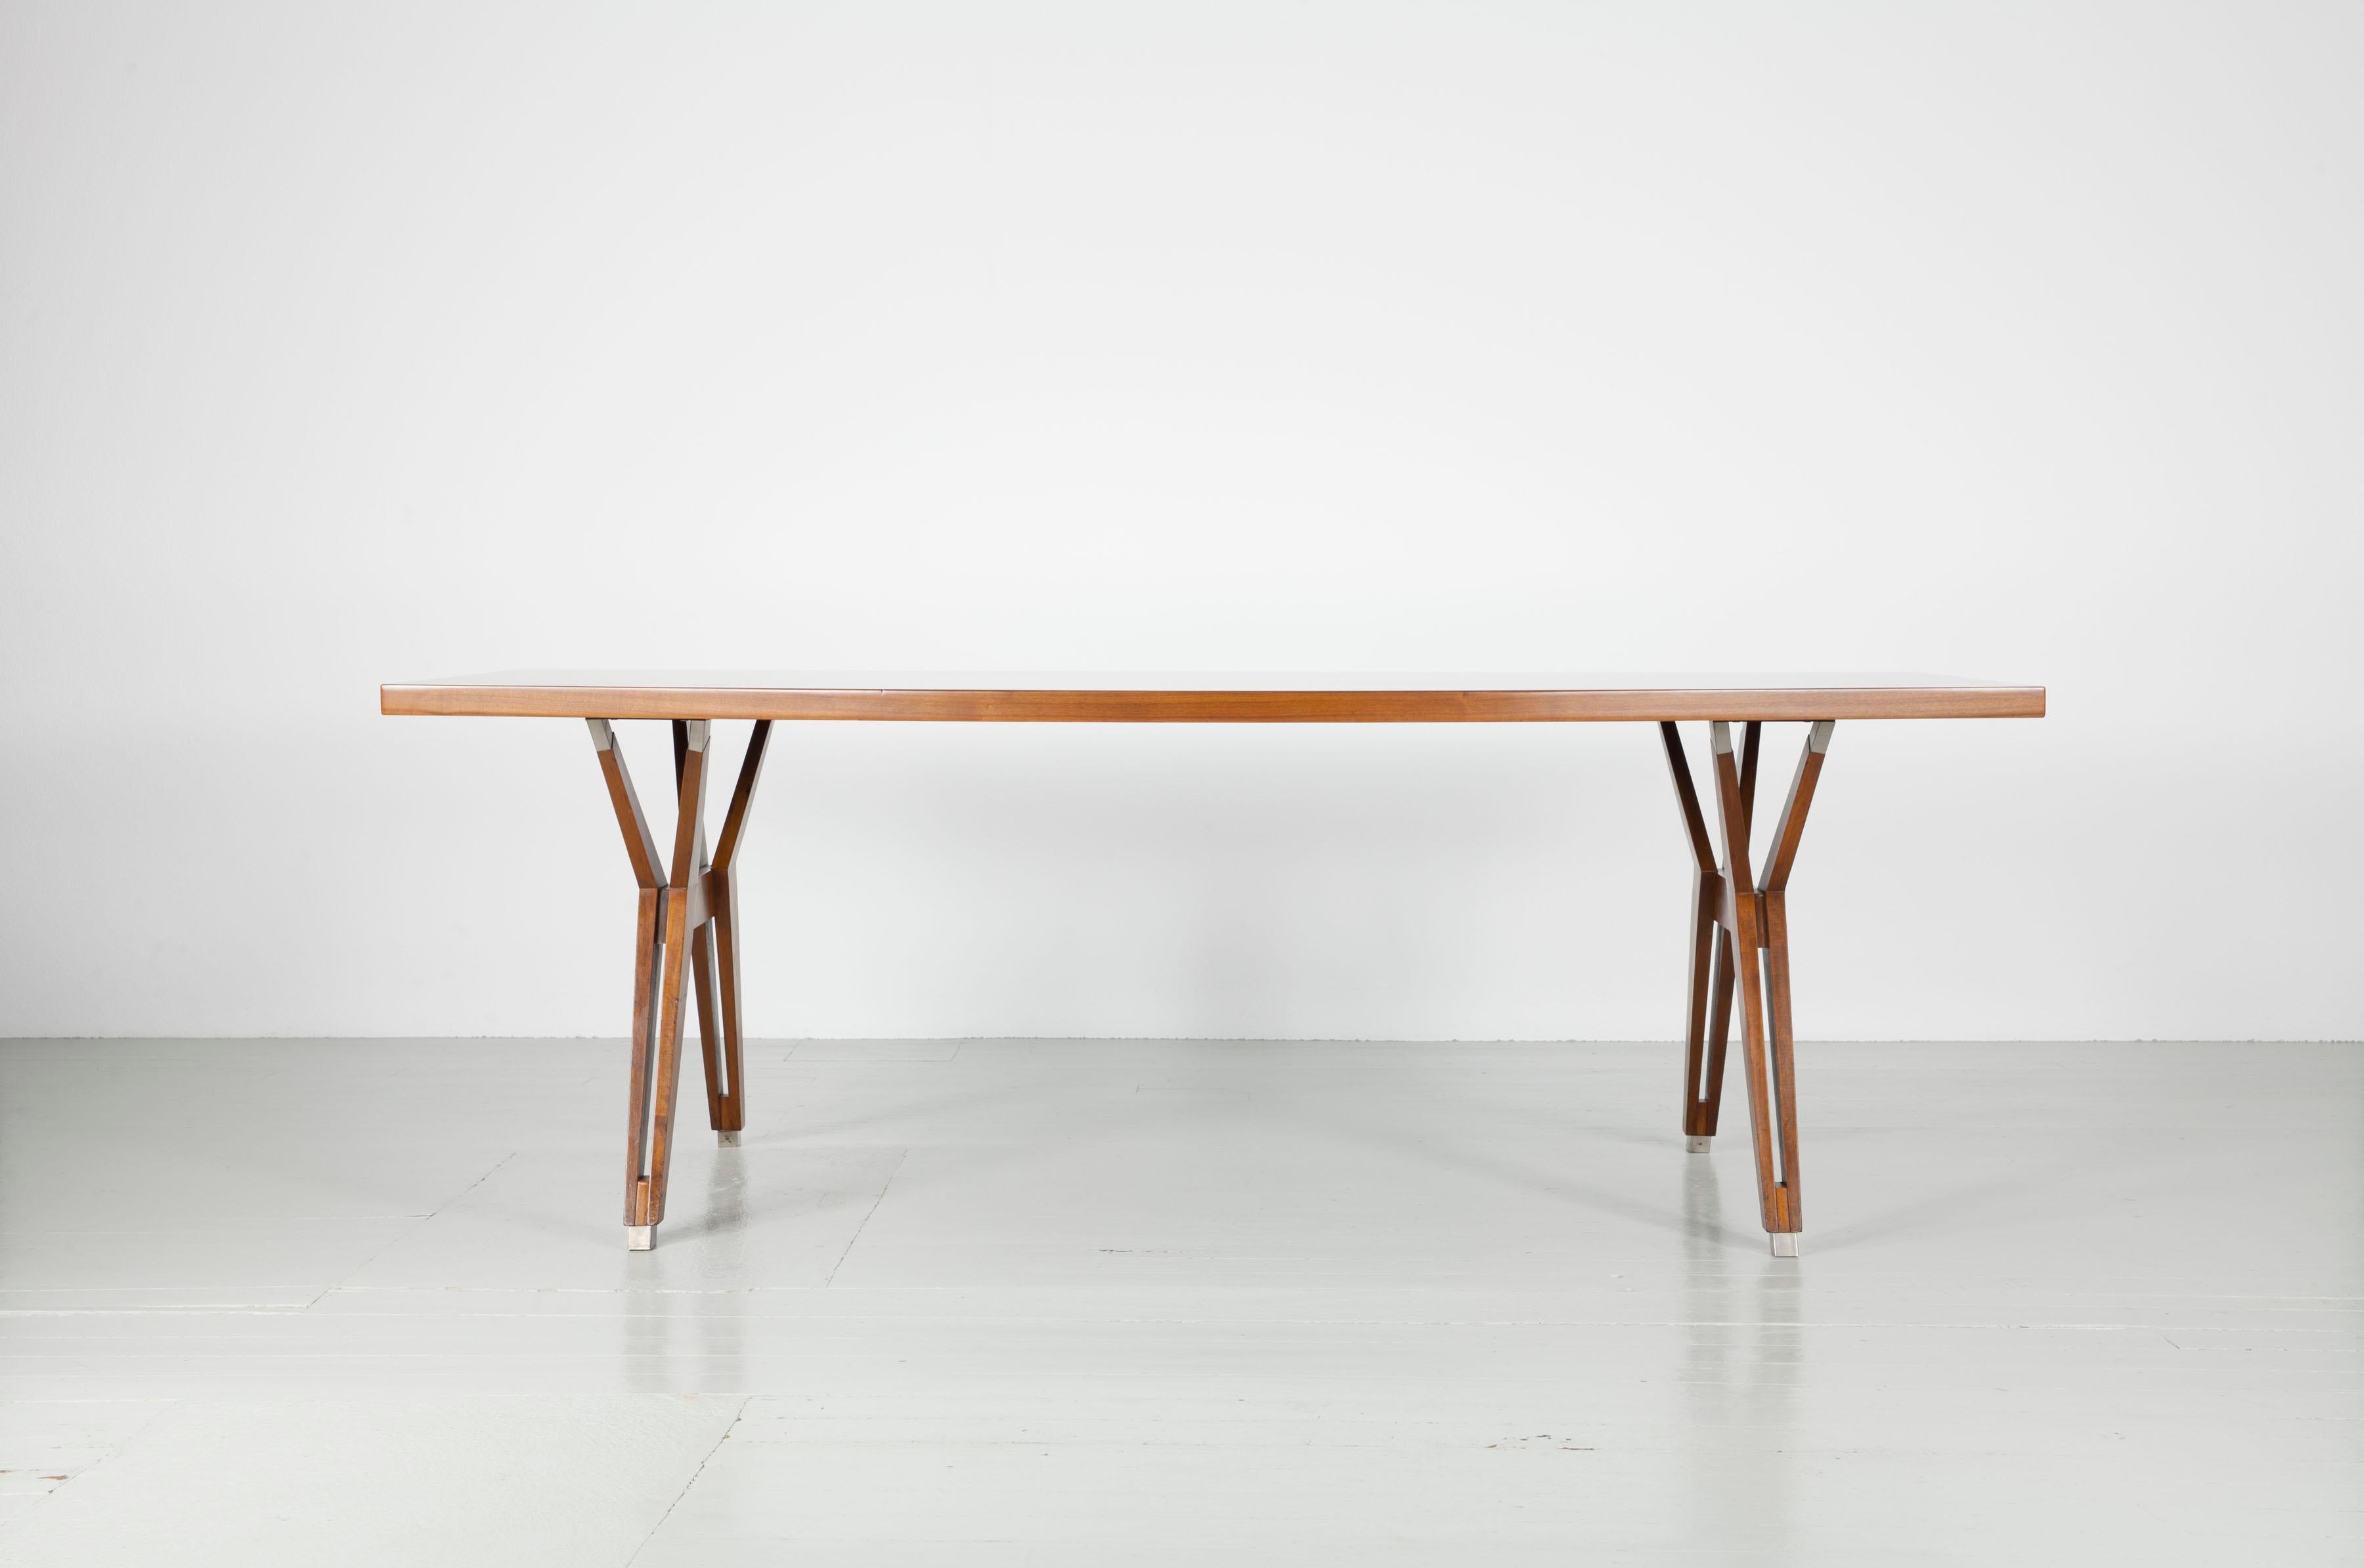 Dining table designed by Ico Parisi, made by MIM - Mobili Italiani Moderni, Roma, Italy, 1960s. Striking in this design is the boat-shaped table top. The table remains in a very good condition and is marked with the MIM signature at the side.

Feel